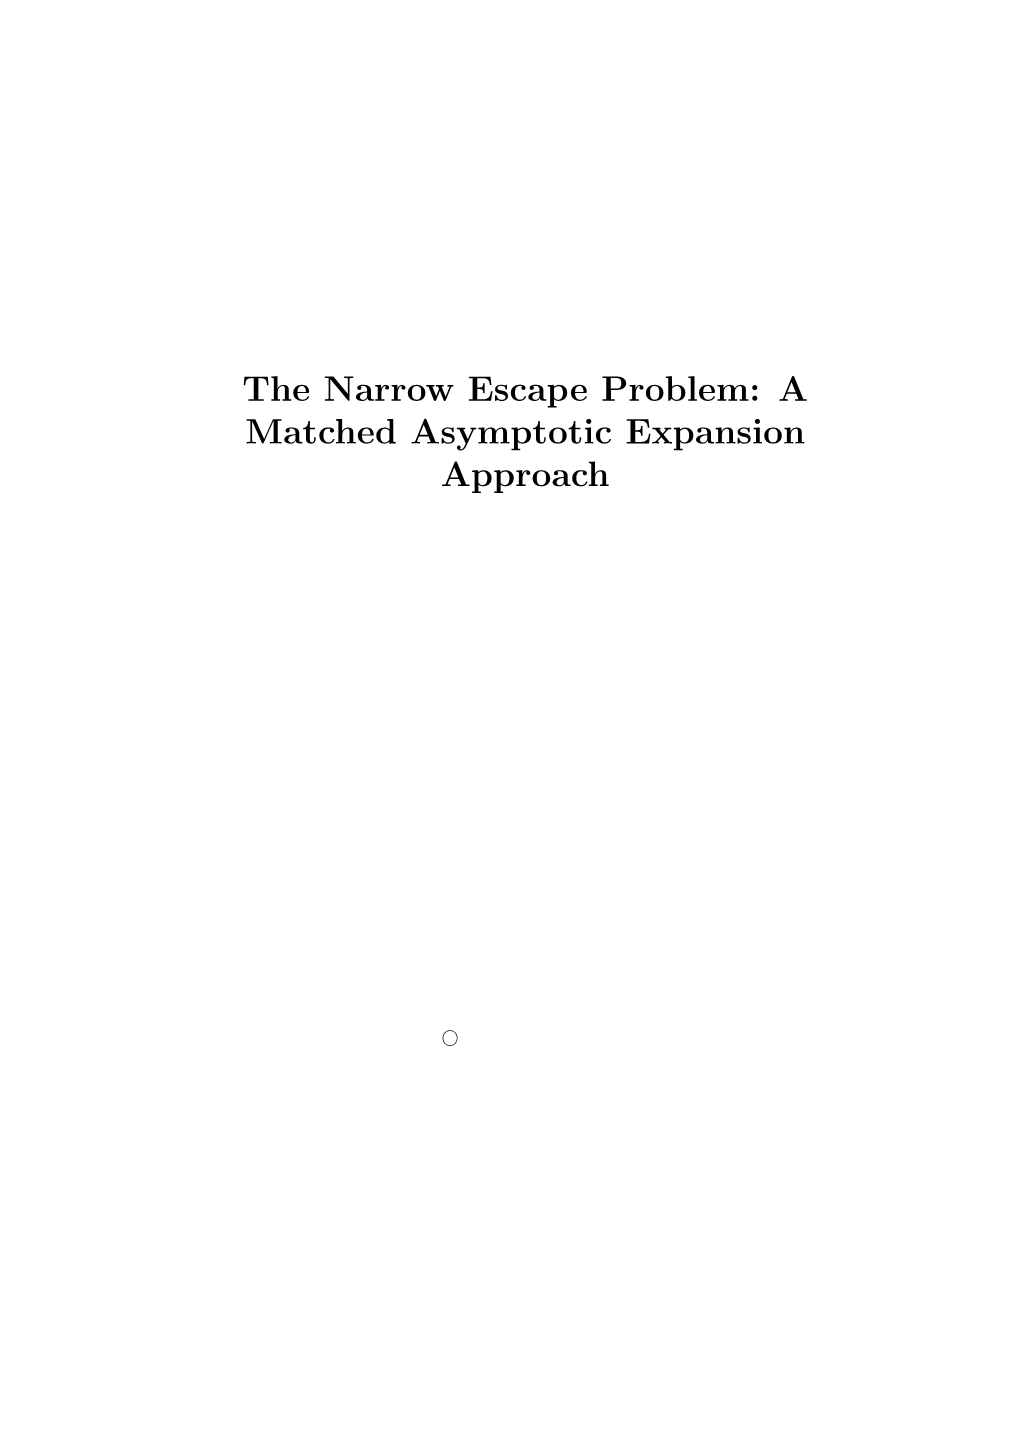 The Narrow Escape Problem: a Matched Asymptotic Expansion Approach By